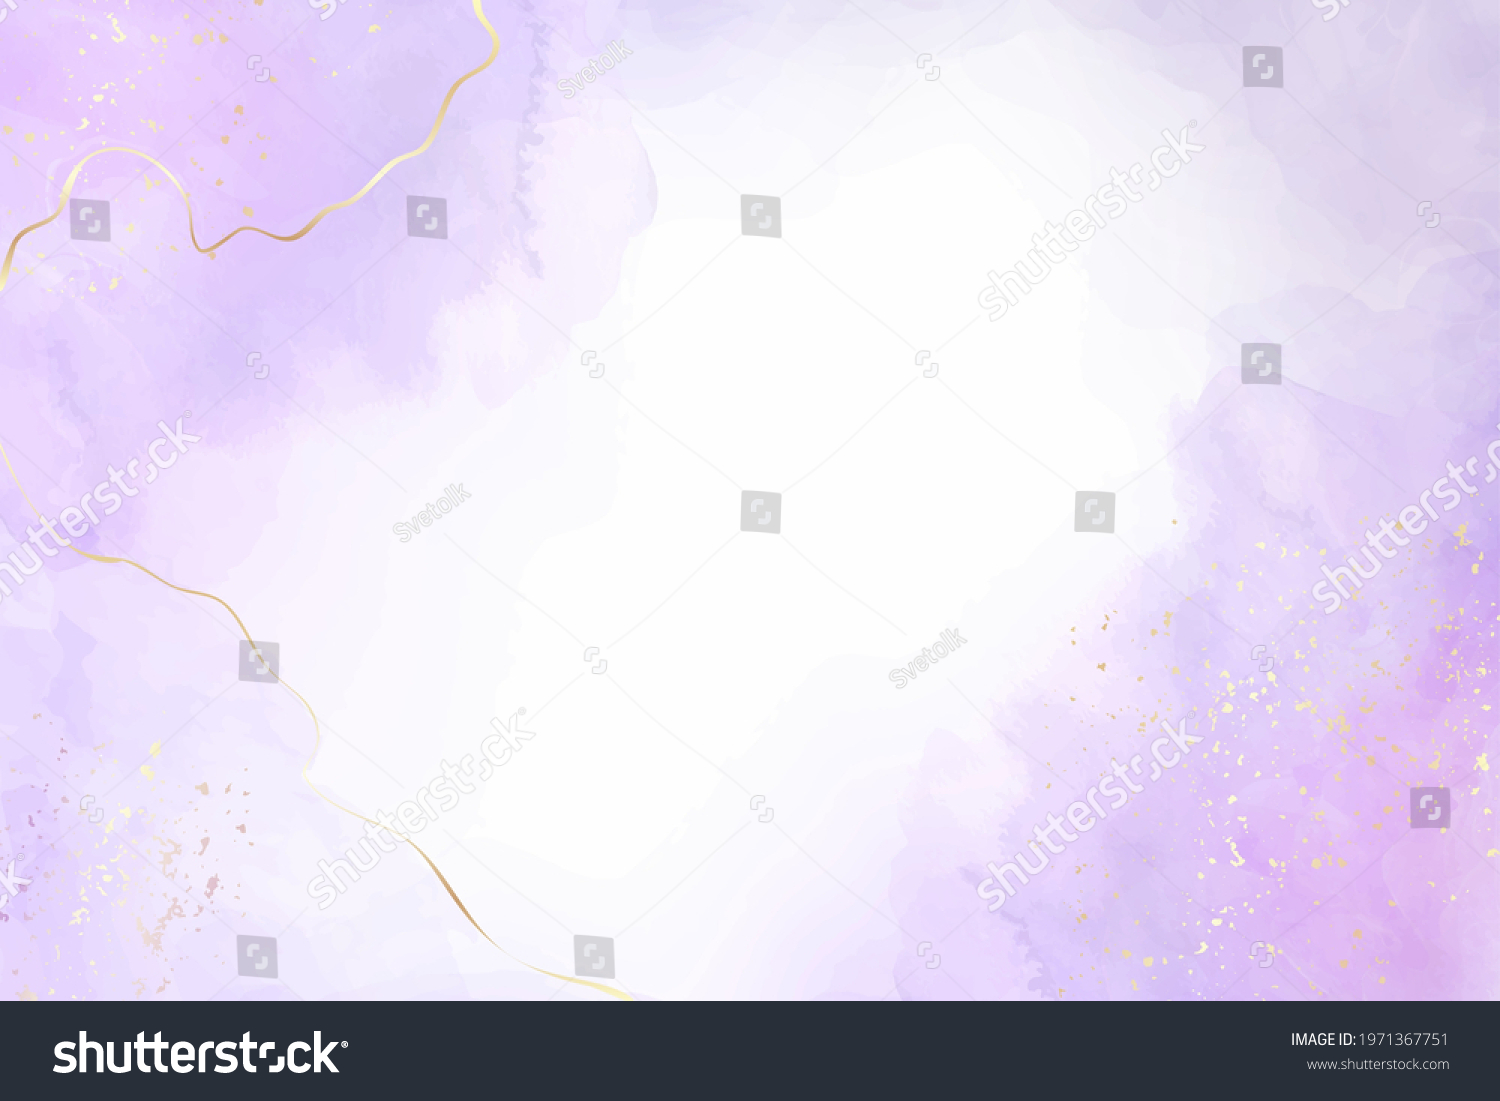 SVG of Mauve liquid watercolor background with golden glitter splash. Pastel violet marble alcohol ink drawing effect. Vector illustration of abstract stylish fluid art amethyst backdrop. svg